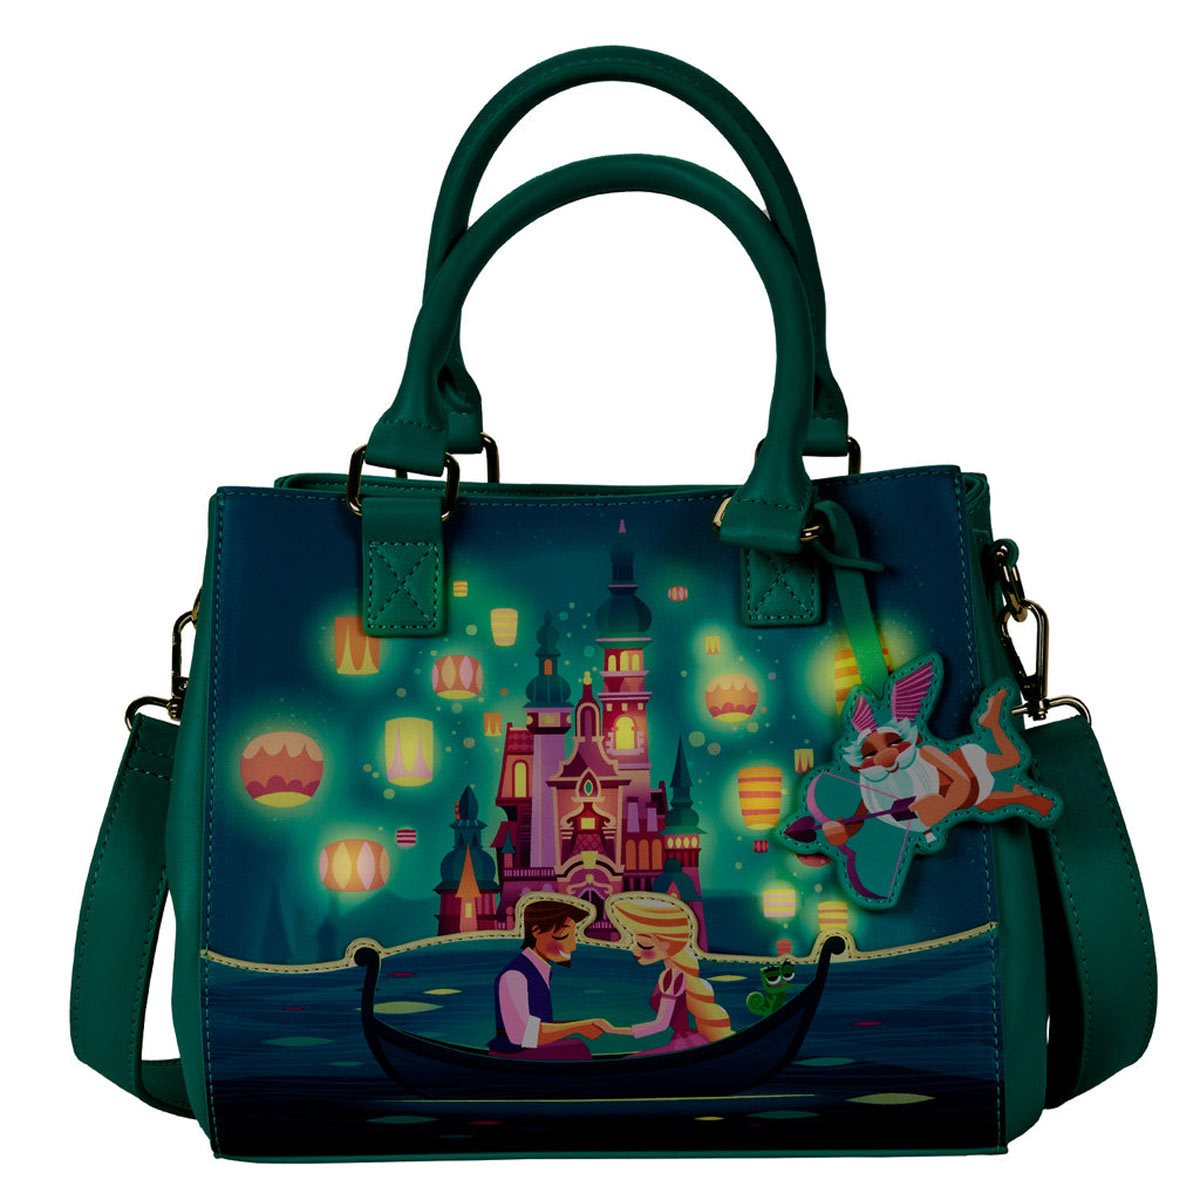 The Latest Dooney & Bourke Disney Bags Are Covered in RARE Characters! |  the disney food blog